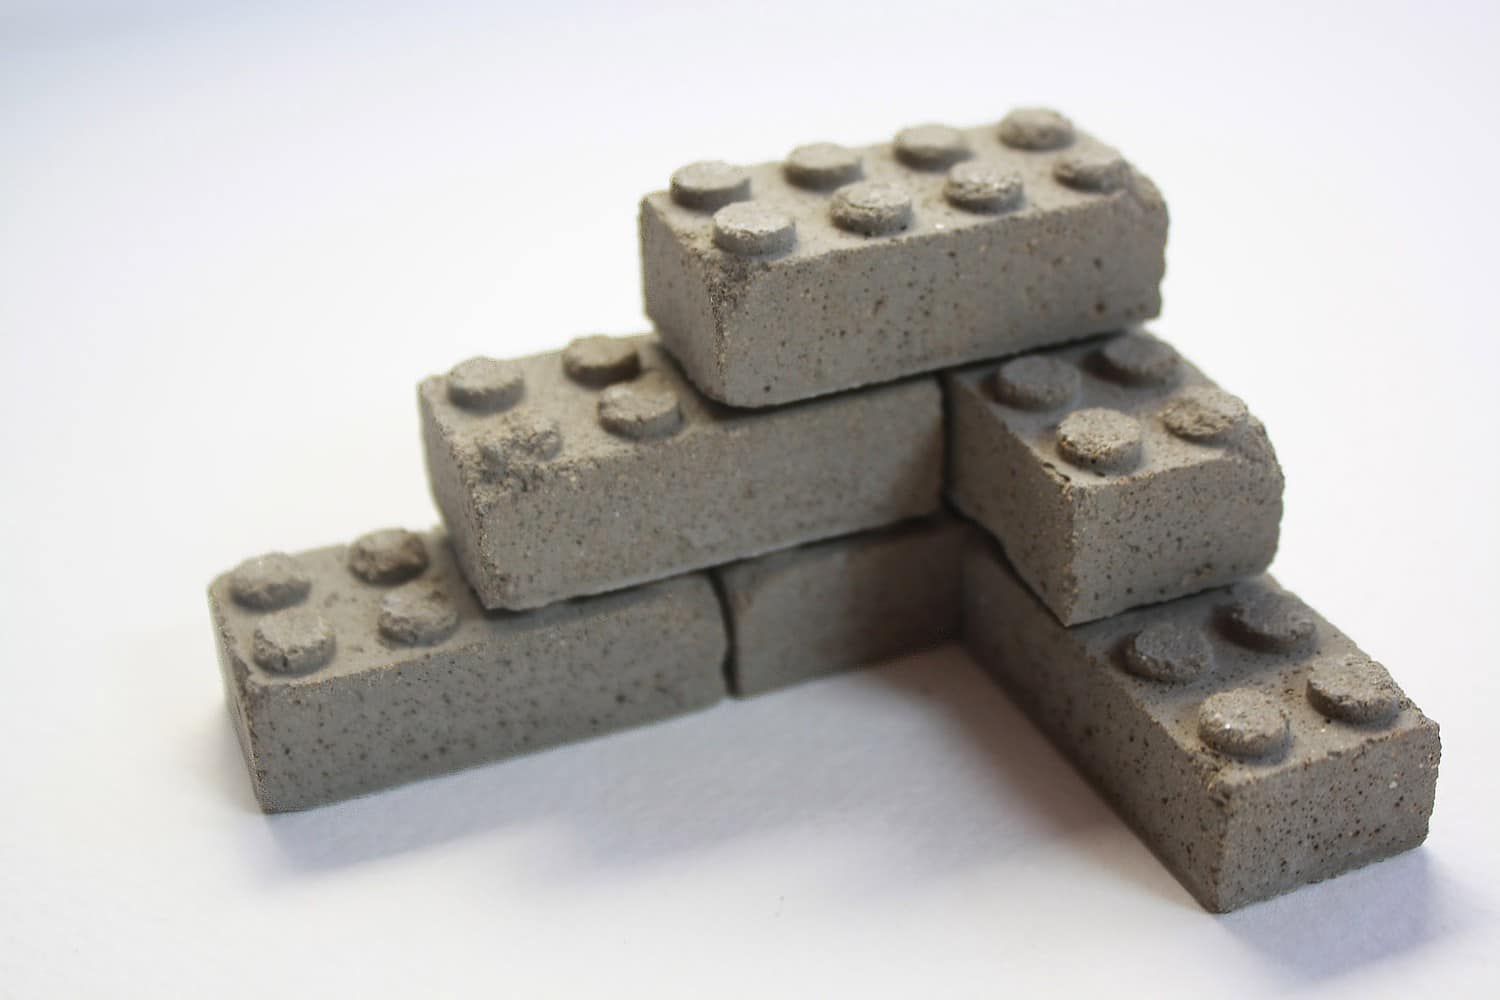 Real Concrete Lego Blocks Make Your Builds Realistic